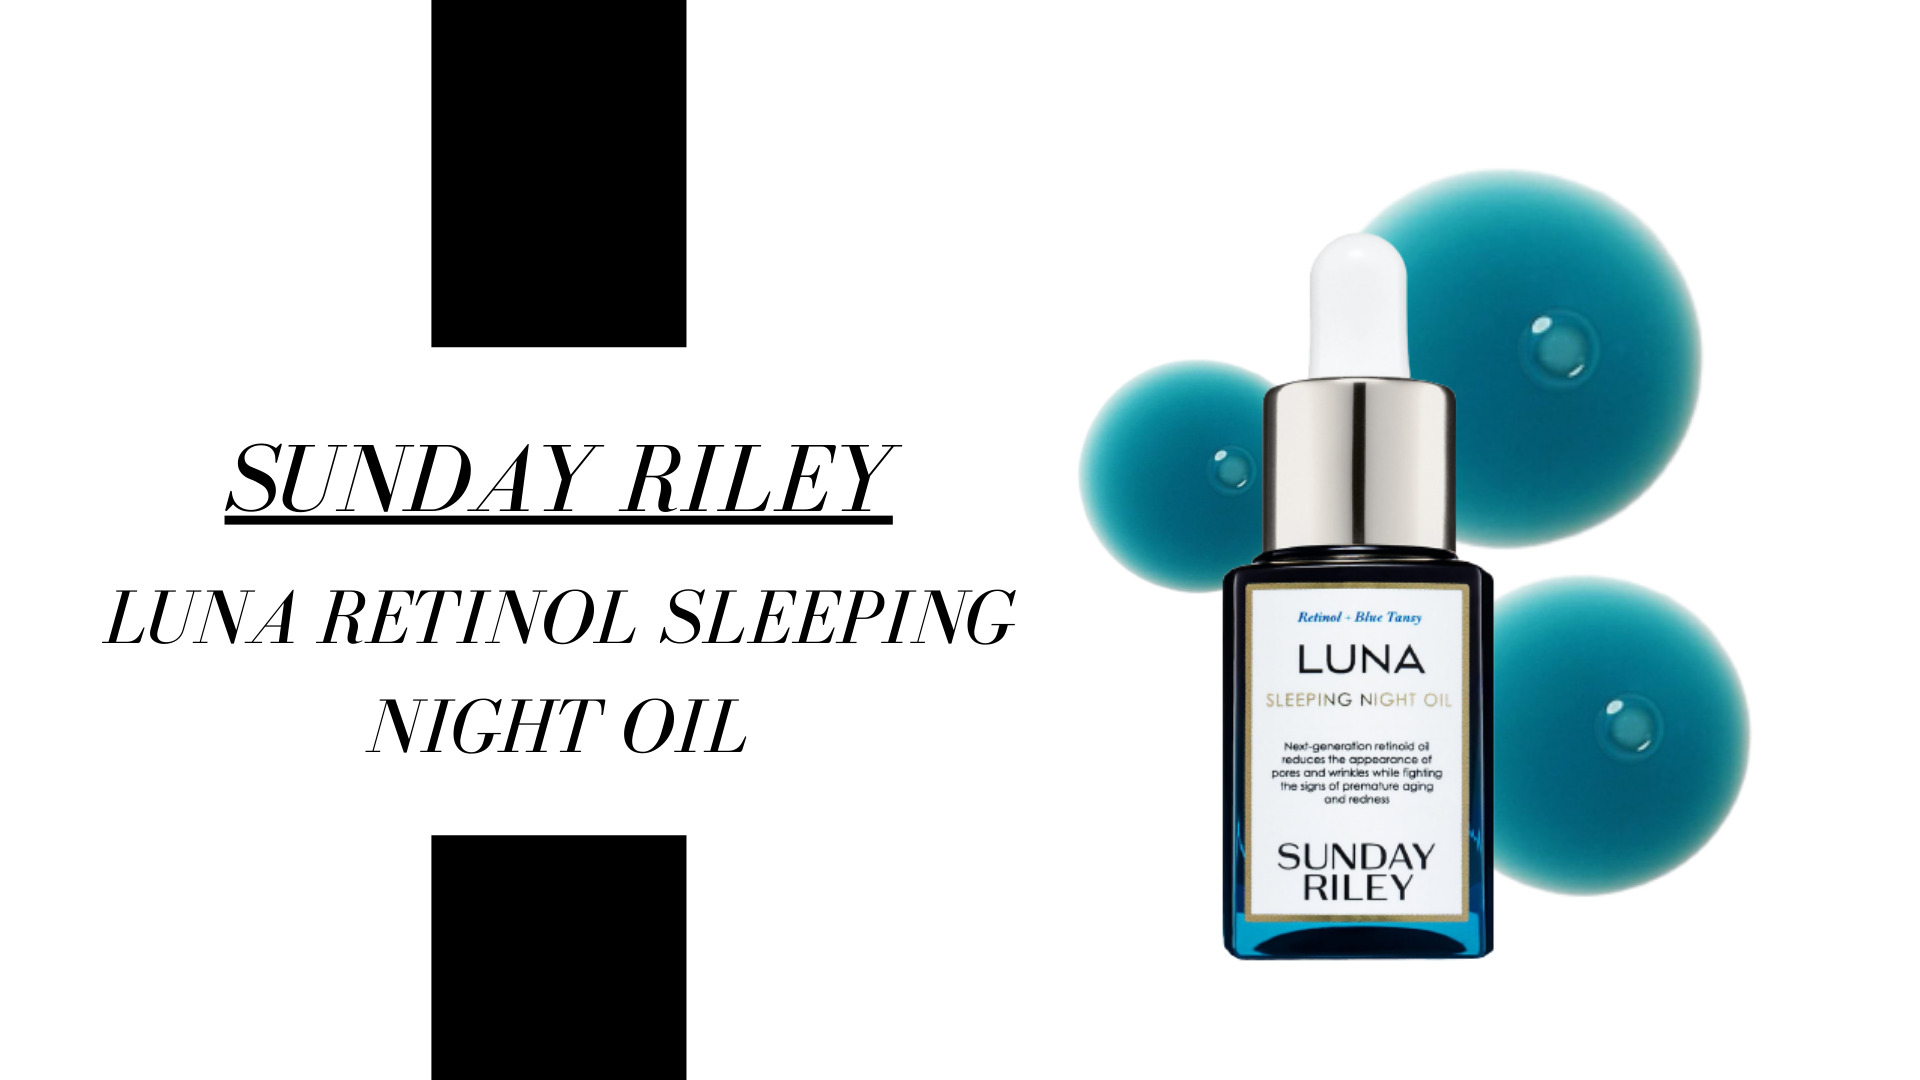 This serum from Sunday Riley is impressive if your skincare concerns are fine lines, wrinkles, pores, and redness. Suited for normal, dry, combination, and oily skin, this product is a gentle retinoid night oil, perfect for both new and experienced retinol users.